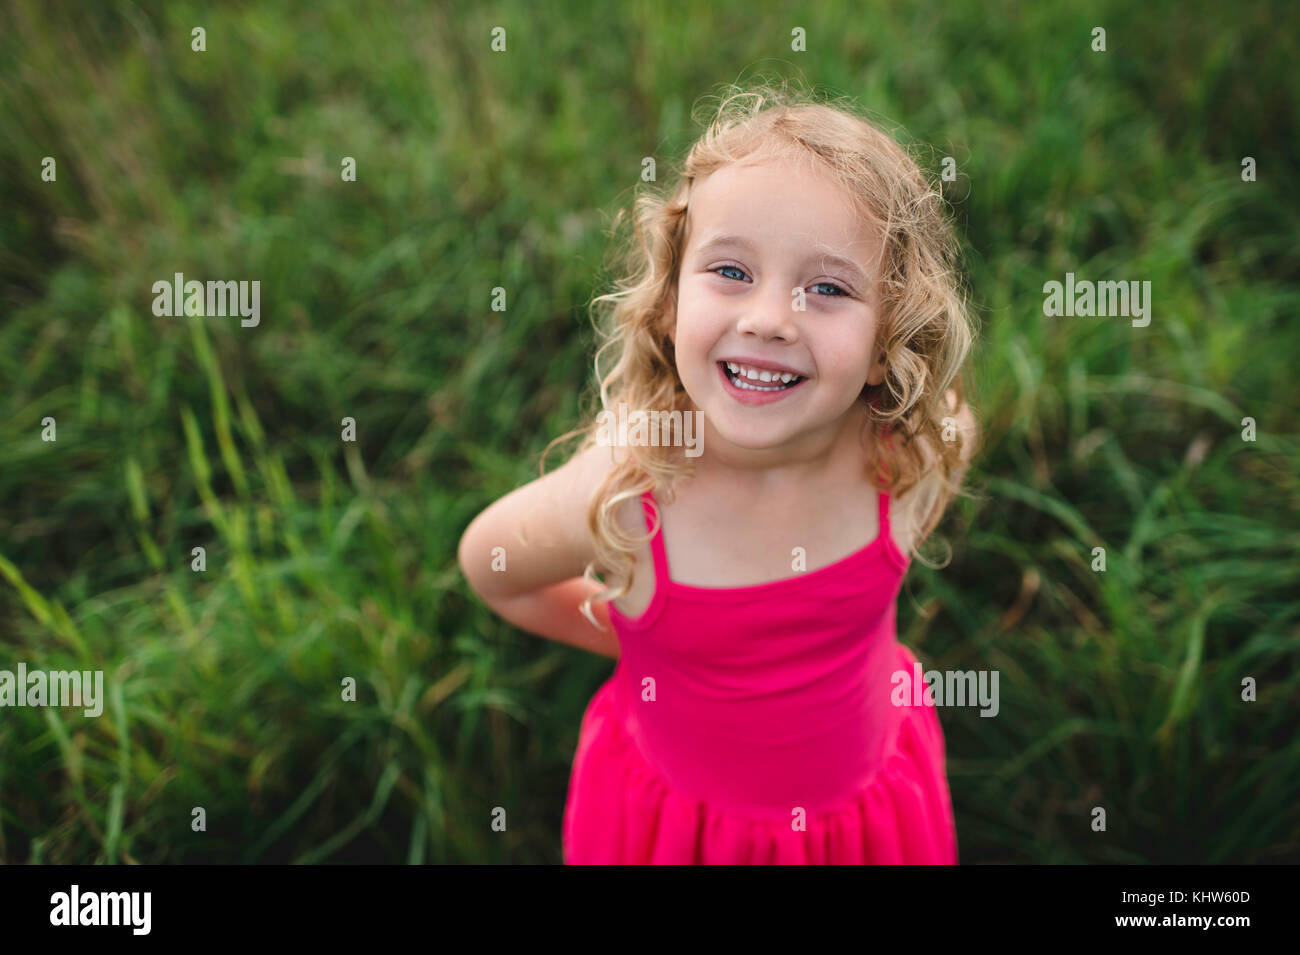 Portrait of blond haired girl in grass Stock Photo